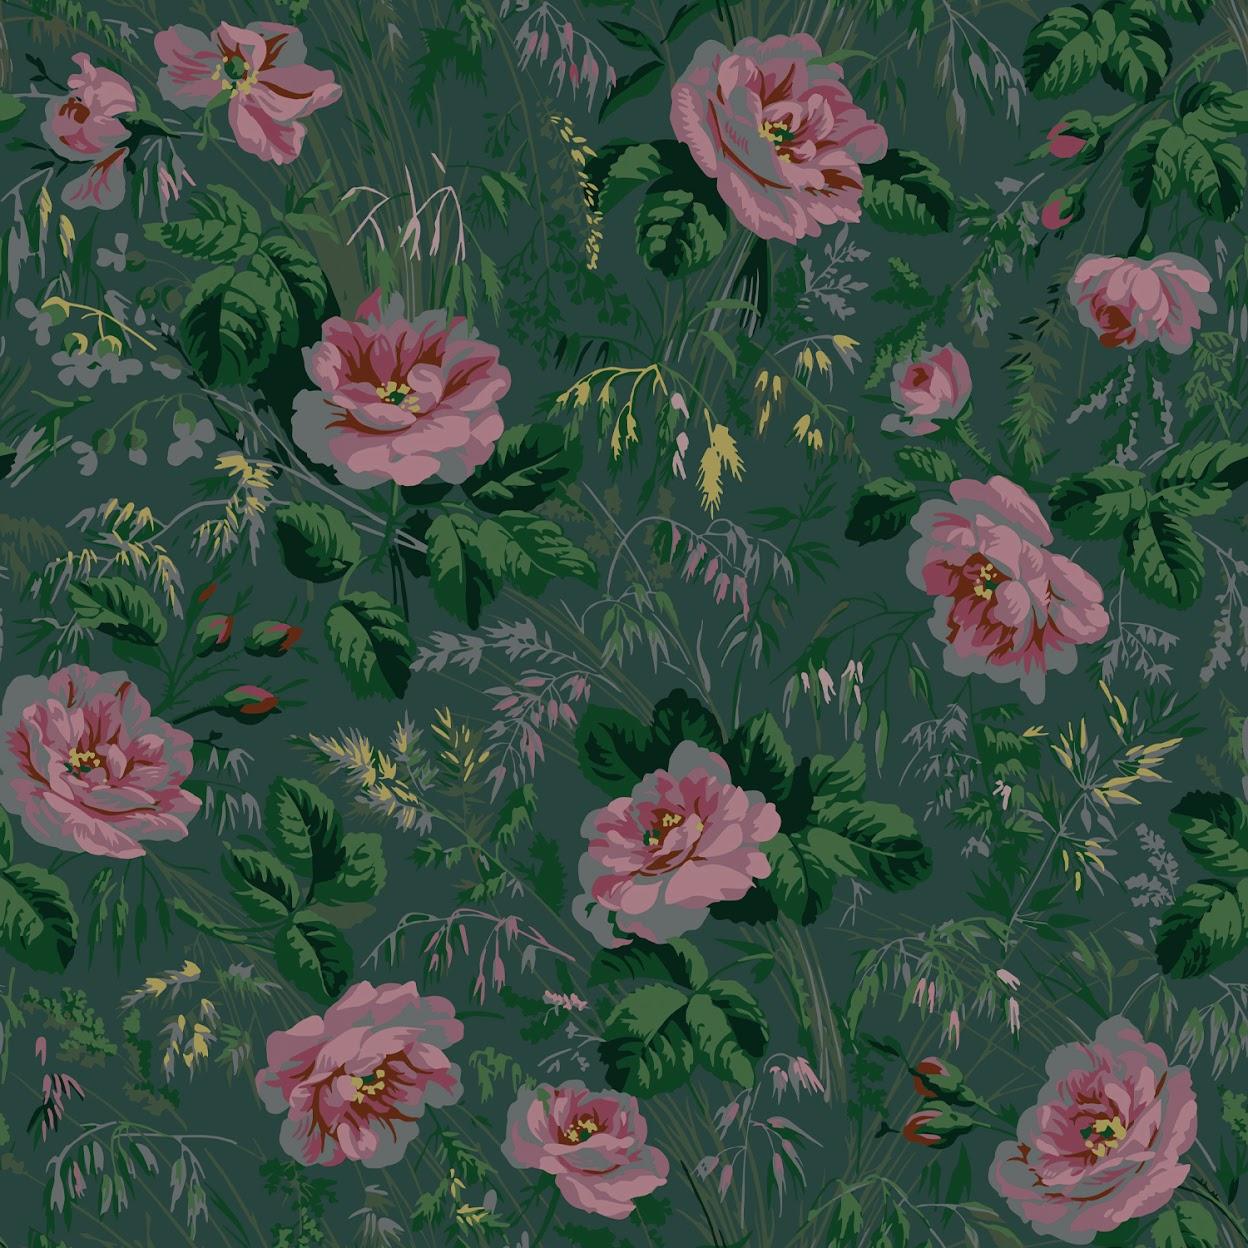 Repeat: 70 cm / 27.6 in

Founded in 2019, the French wallpaper brand Papier Francais is defined by the rediscovery, restoration, and revival of iconic wallpapers dating back to the French “Golden Age of wallpaper” of the 18th and 19th centuries.